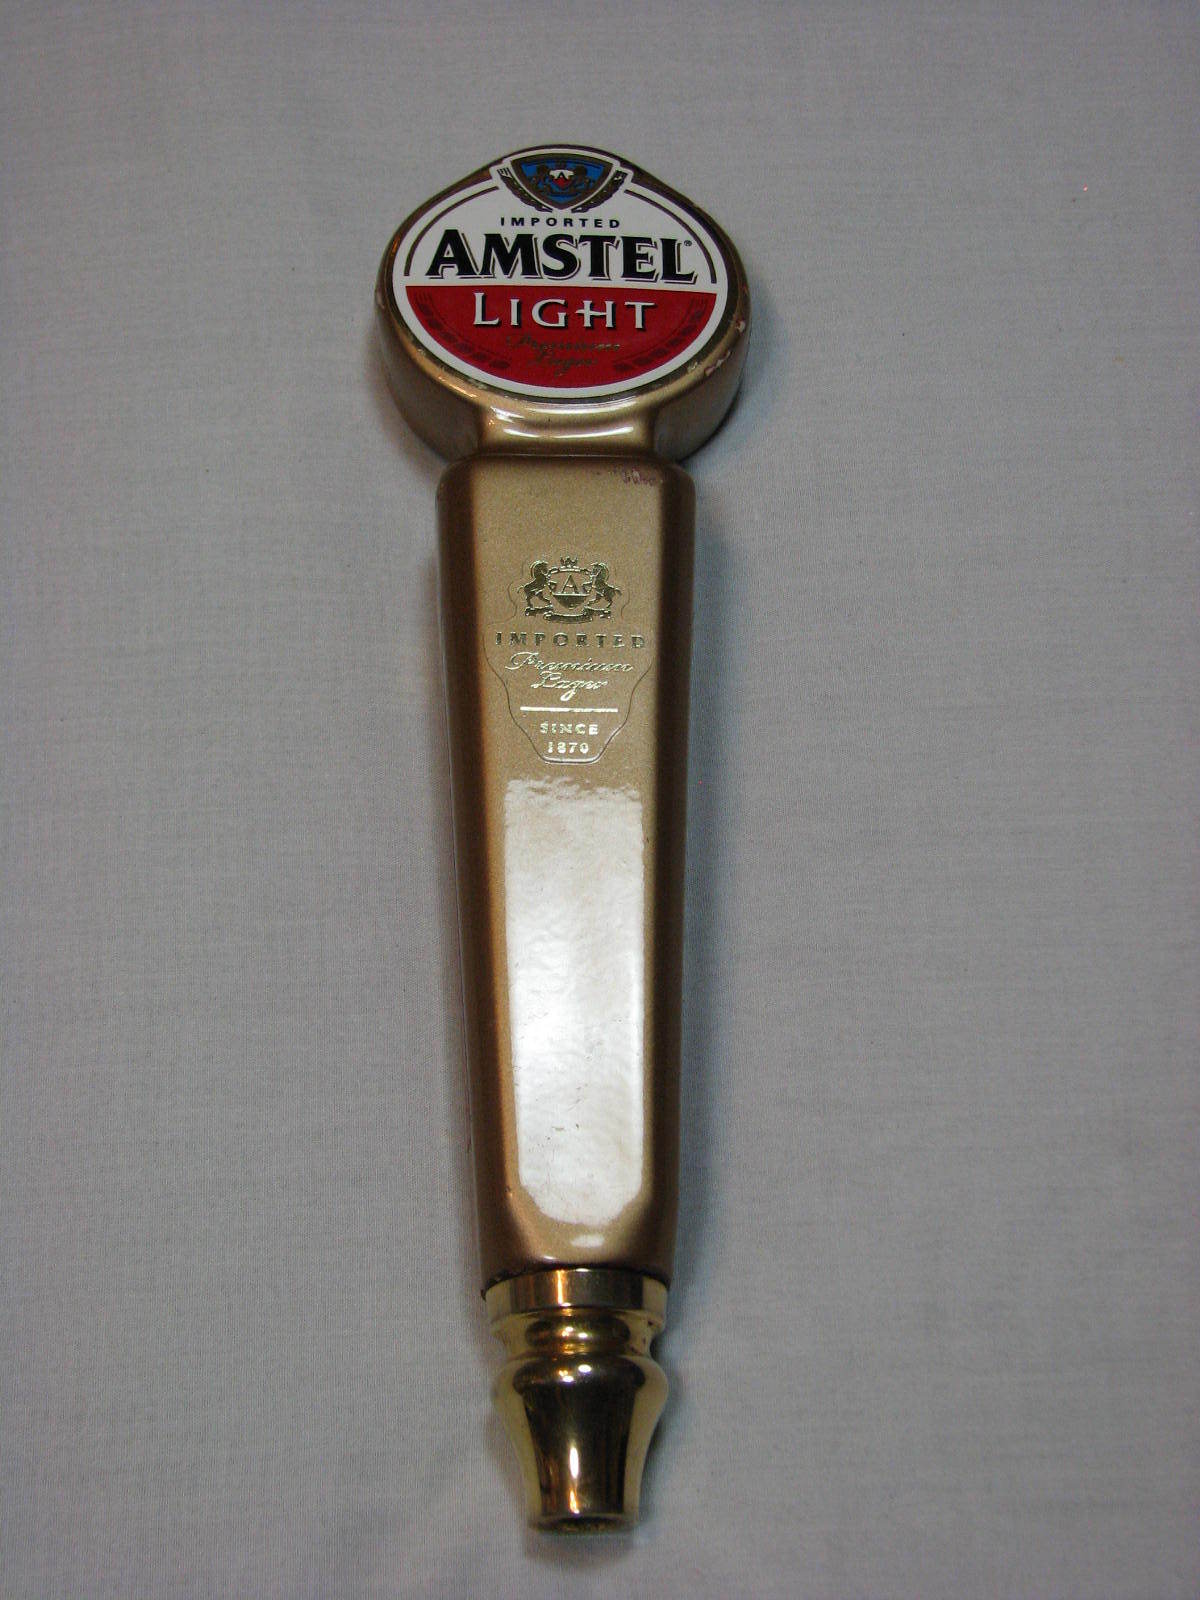 Amstel Light Imported Premium Lager Since 1870 2-Sided Gold Tap handle Beer 